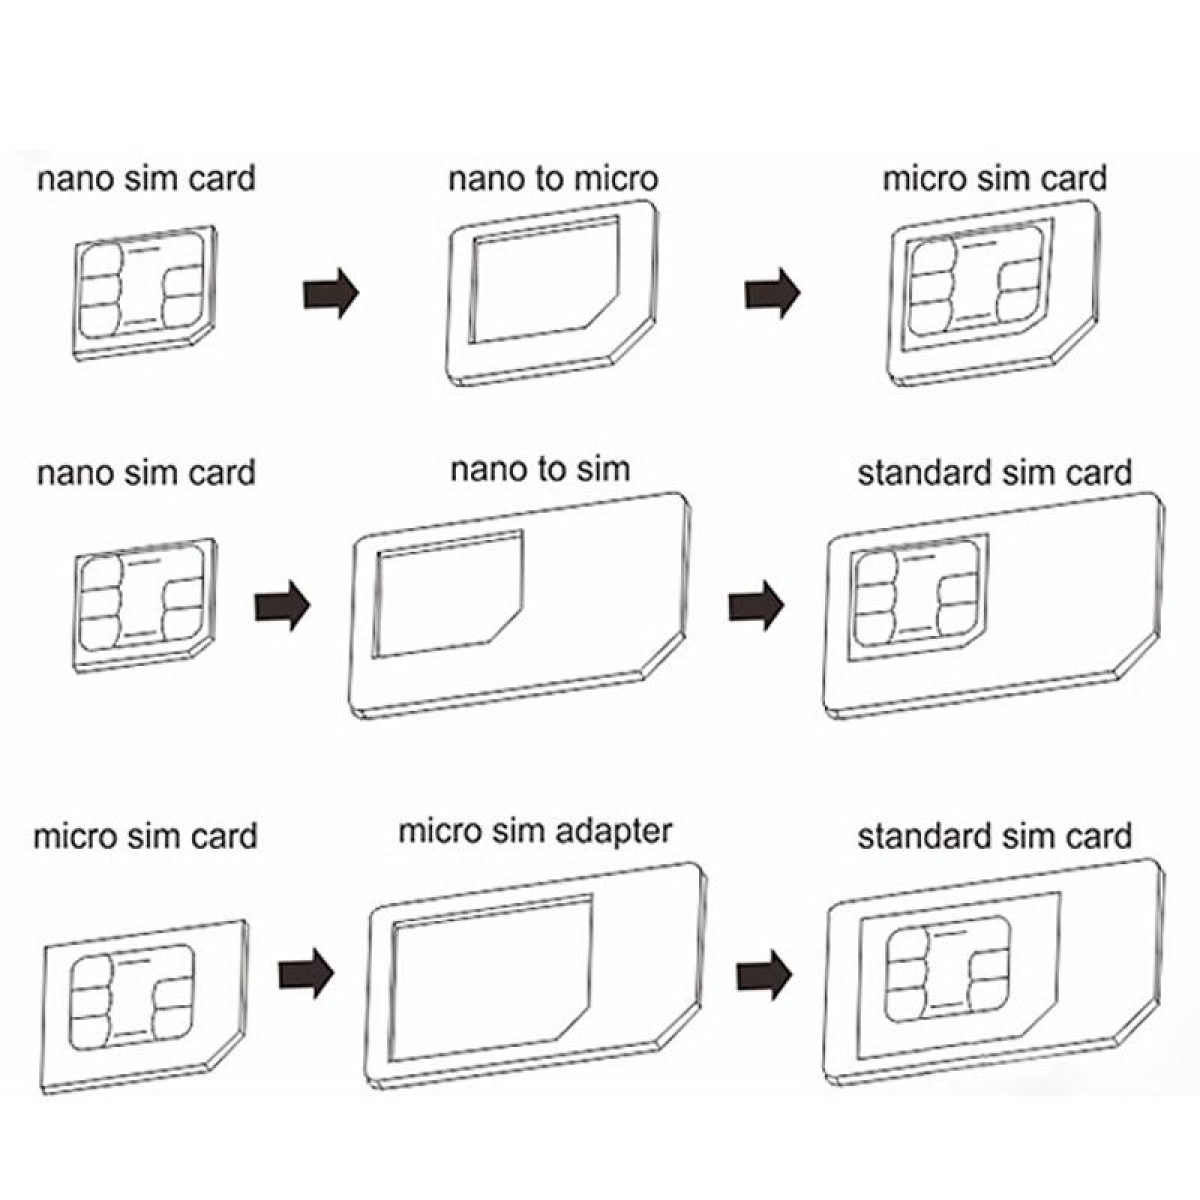 Nano SIM to Micro SIM Card Adapter + Nano SIM to Standard SIM Card Adapter + Micro SIM to Standard SIM Card Adapter + Sim Card Tray Holder Eject Pin Key Tool with Double Sided Tape for iPhone 5 & 5S, iPhone 4 & 4S, 3GS / 3G